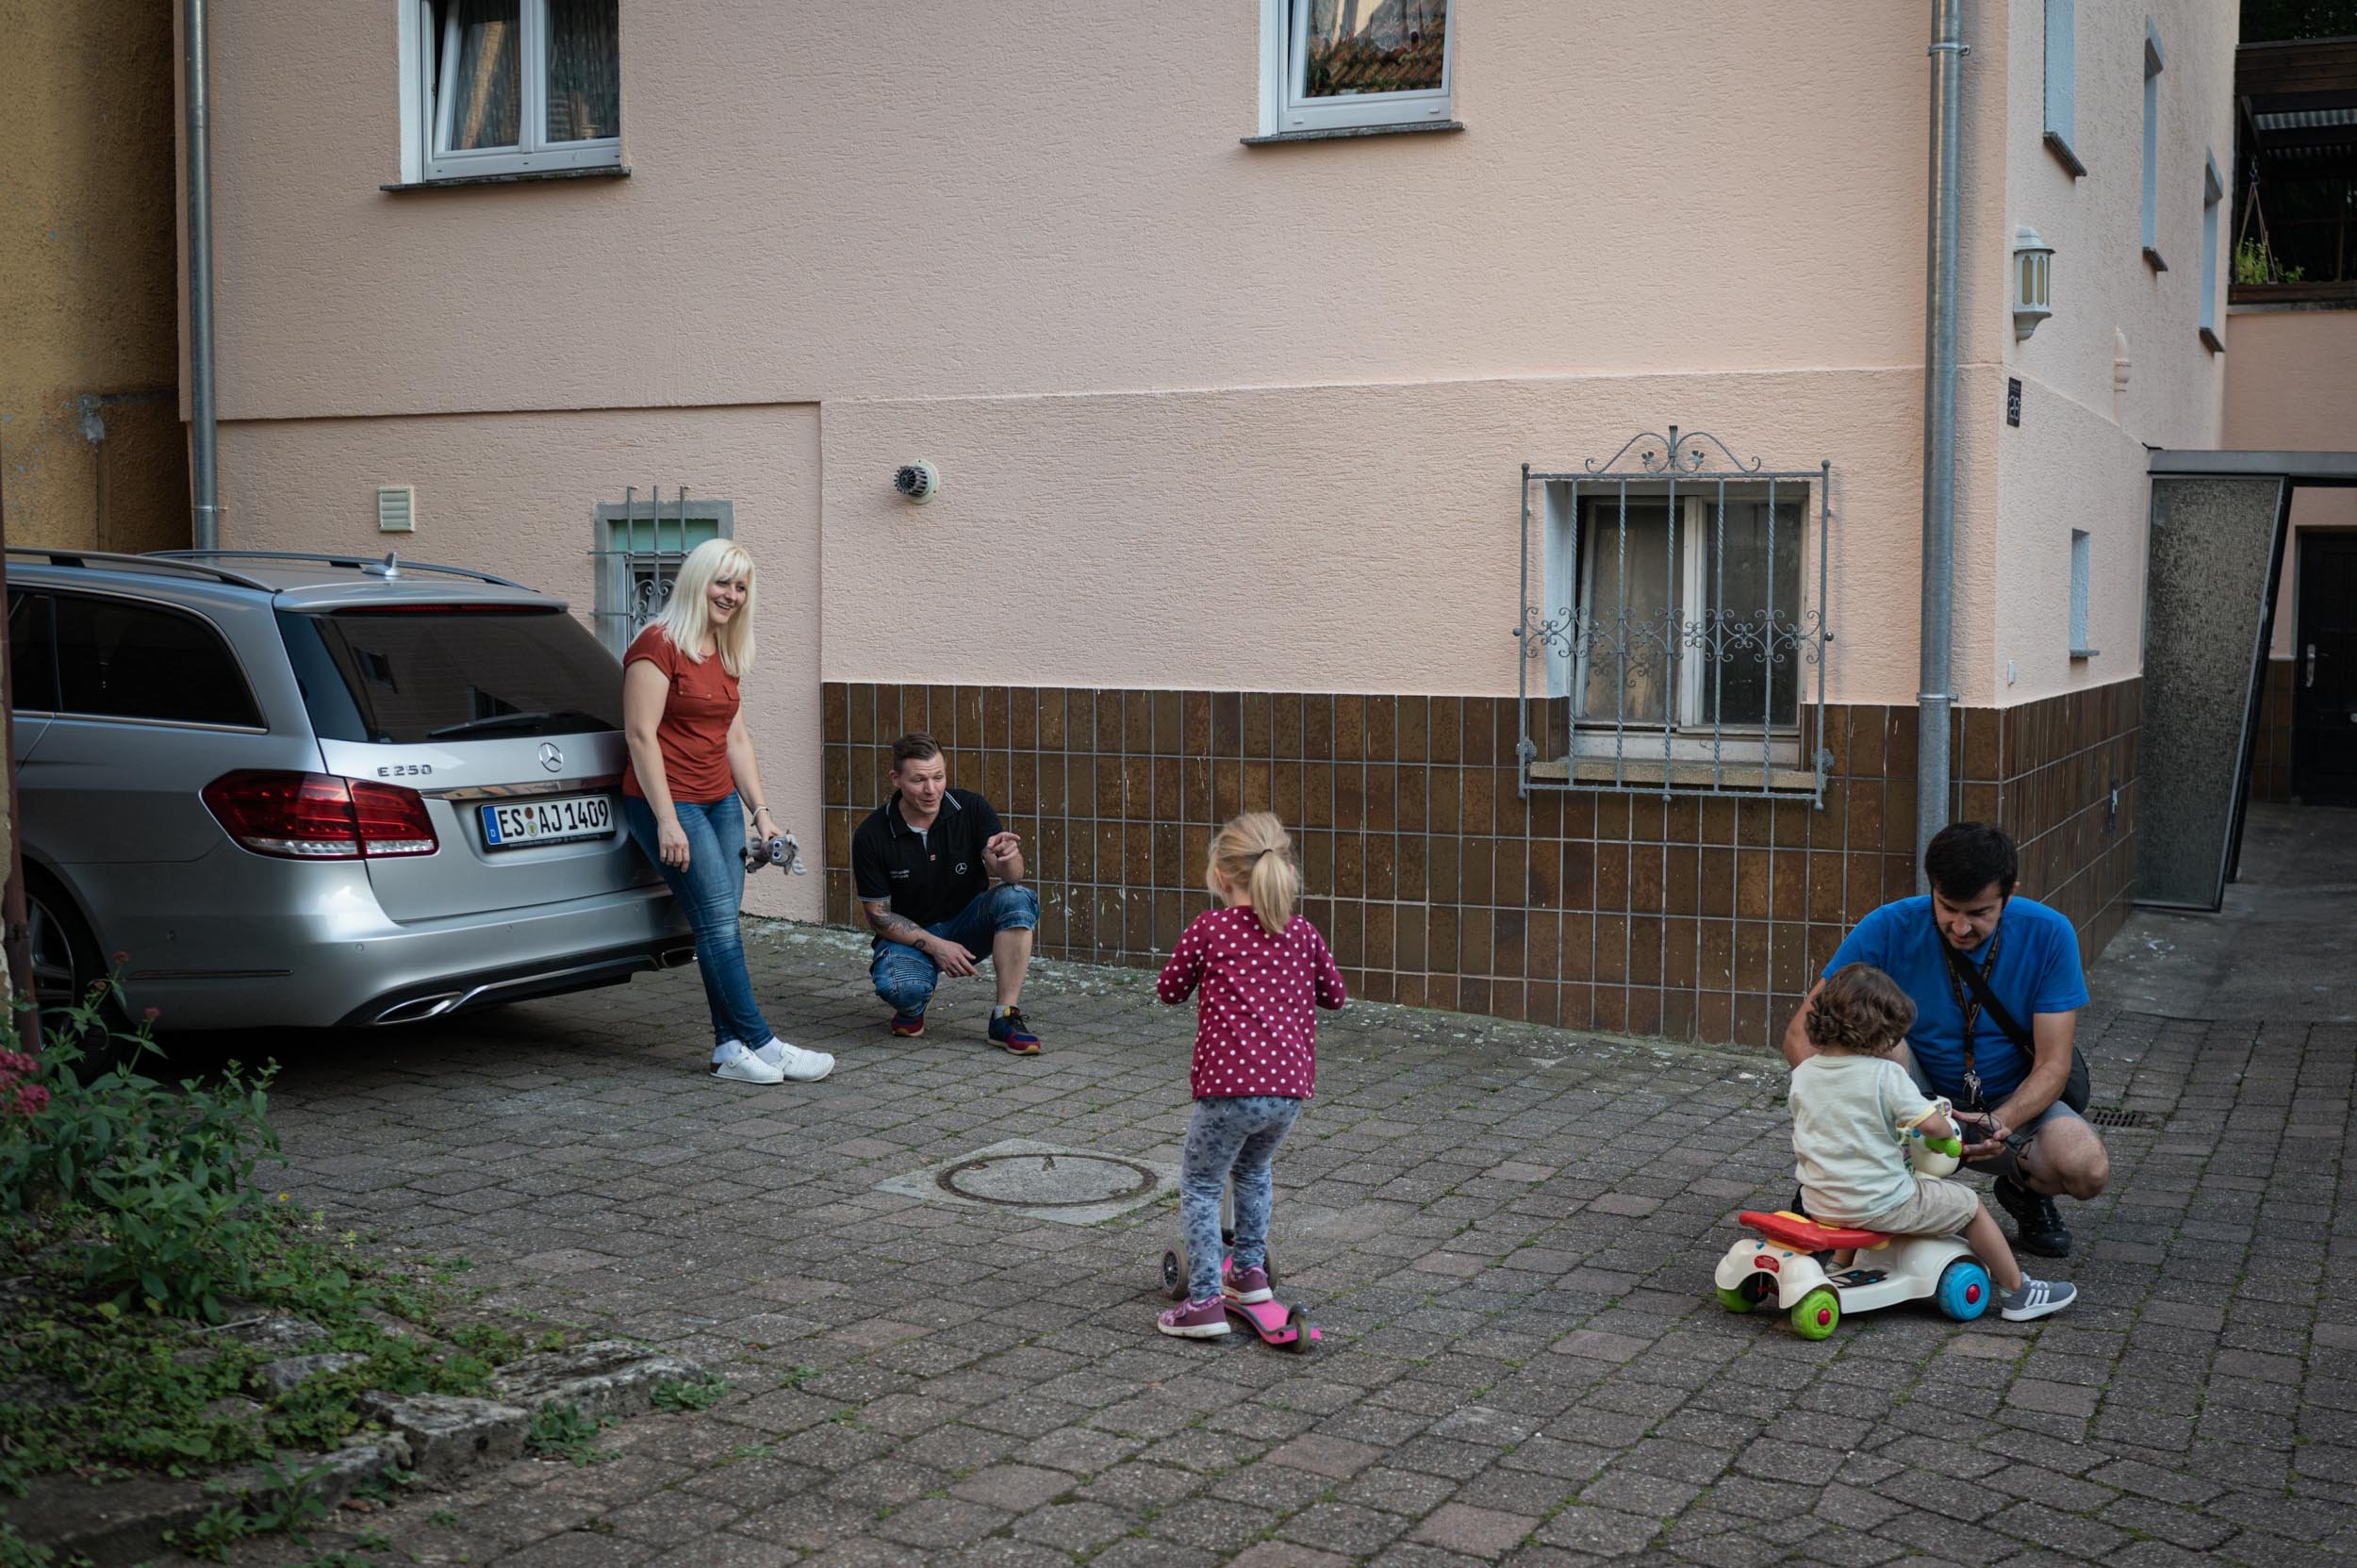  Aleksandar Djordjevic, 38, second from left, and his wife, Jasmina, playing with their daughter and a friend in Plochingen, near Stuttgart. 